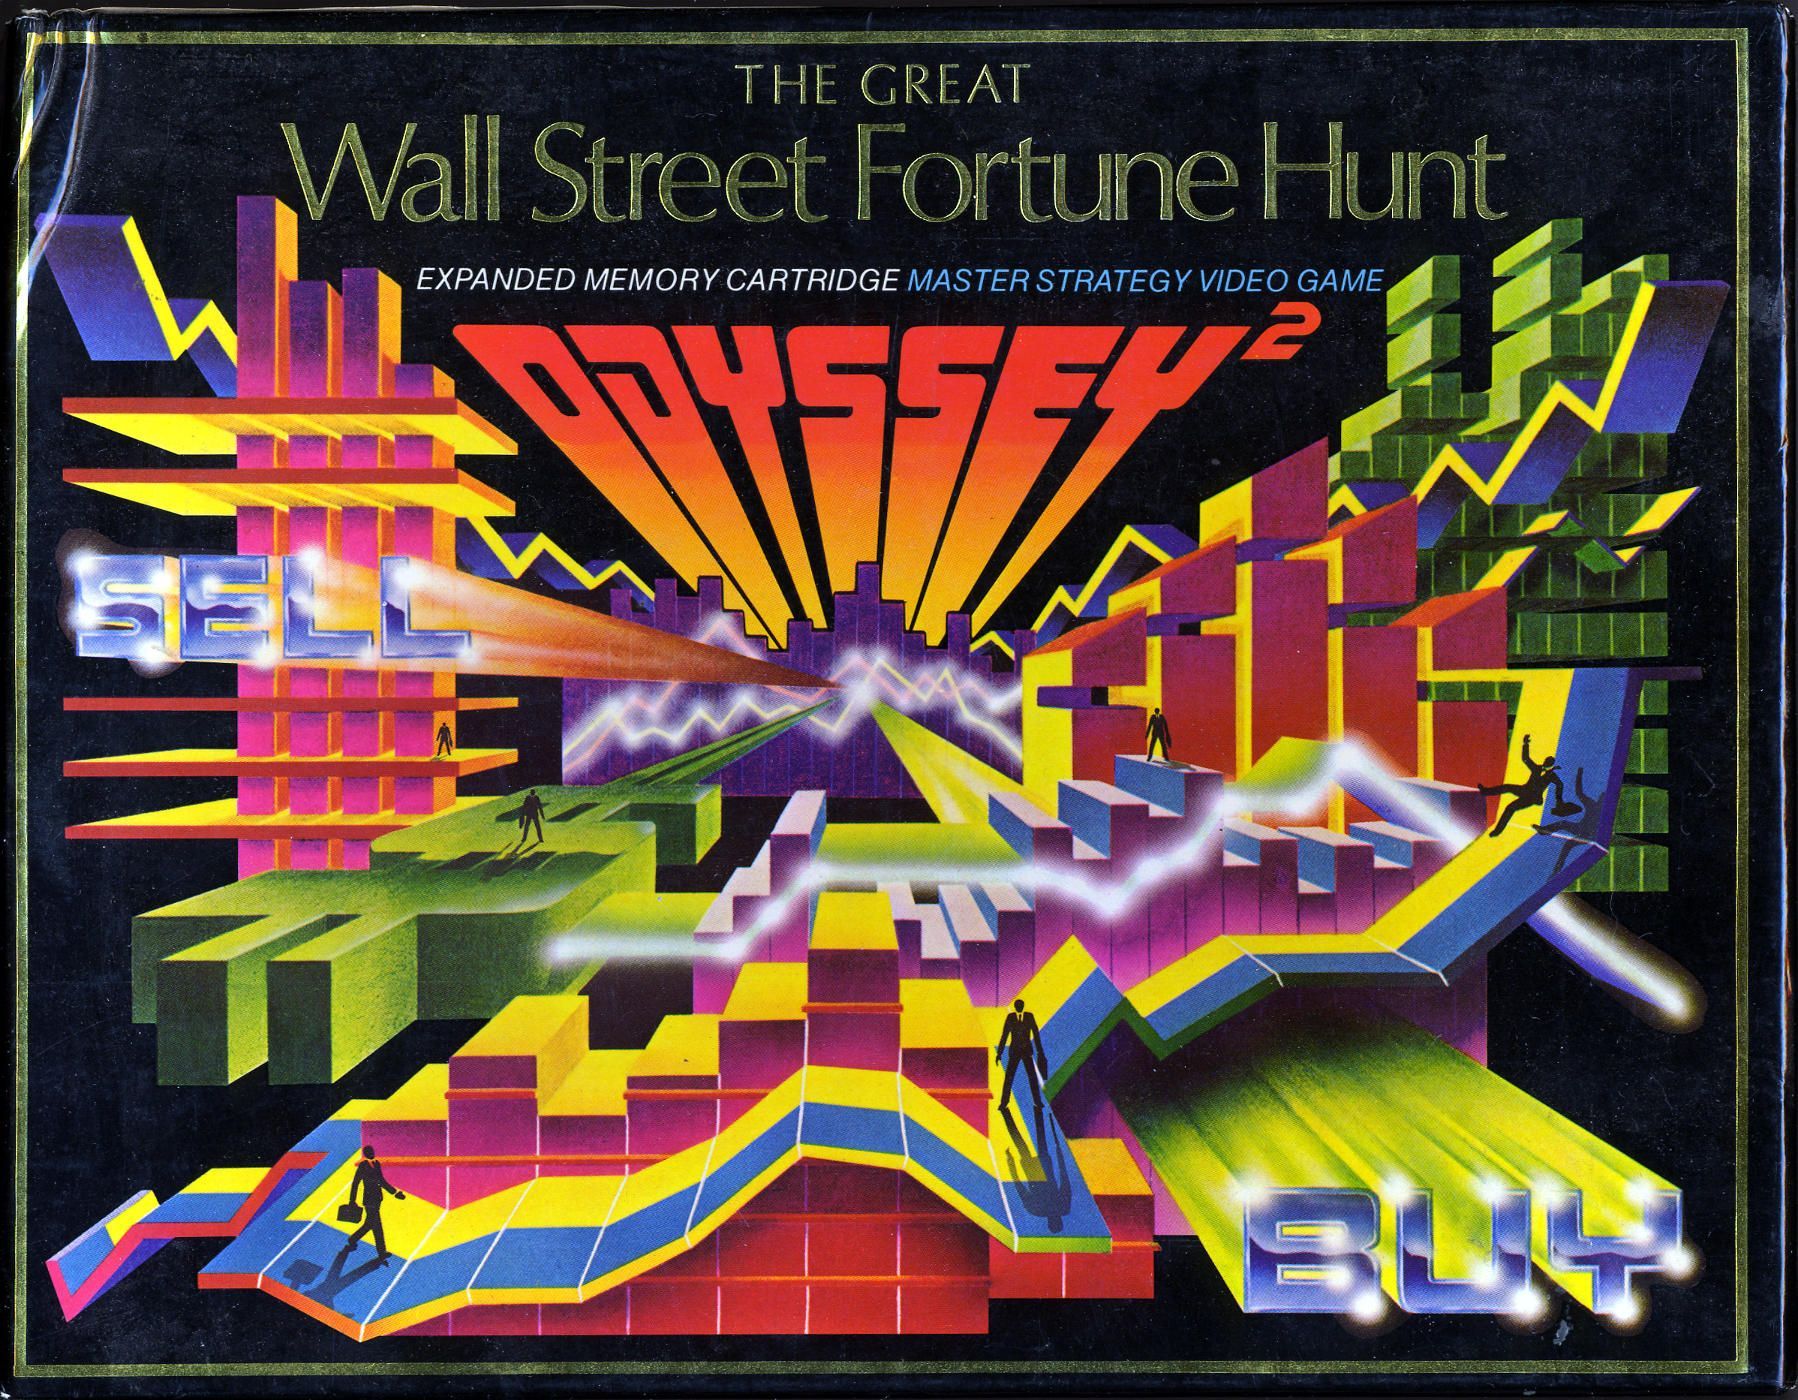 The Great Wall Street Fortune Hunt